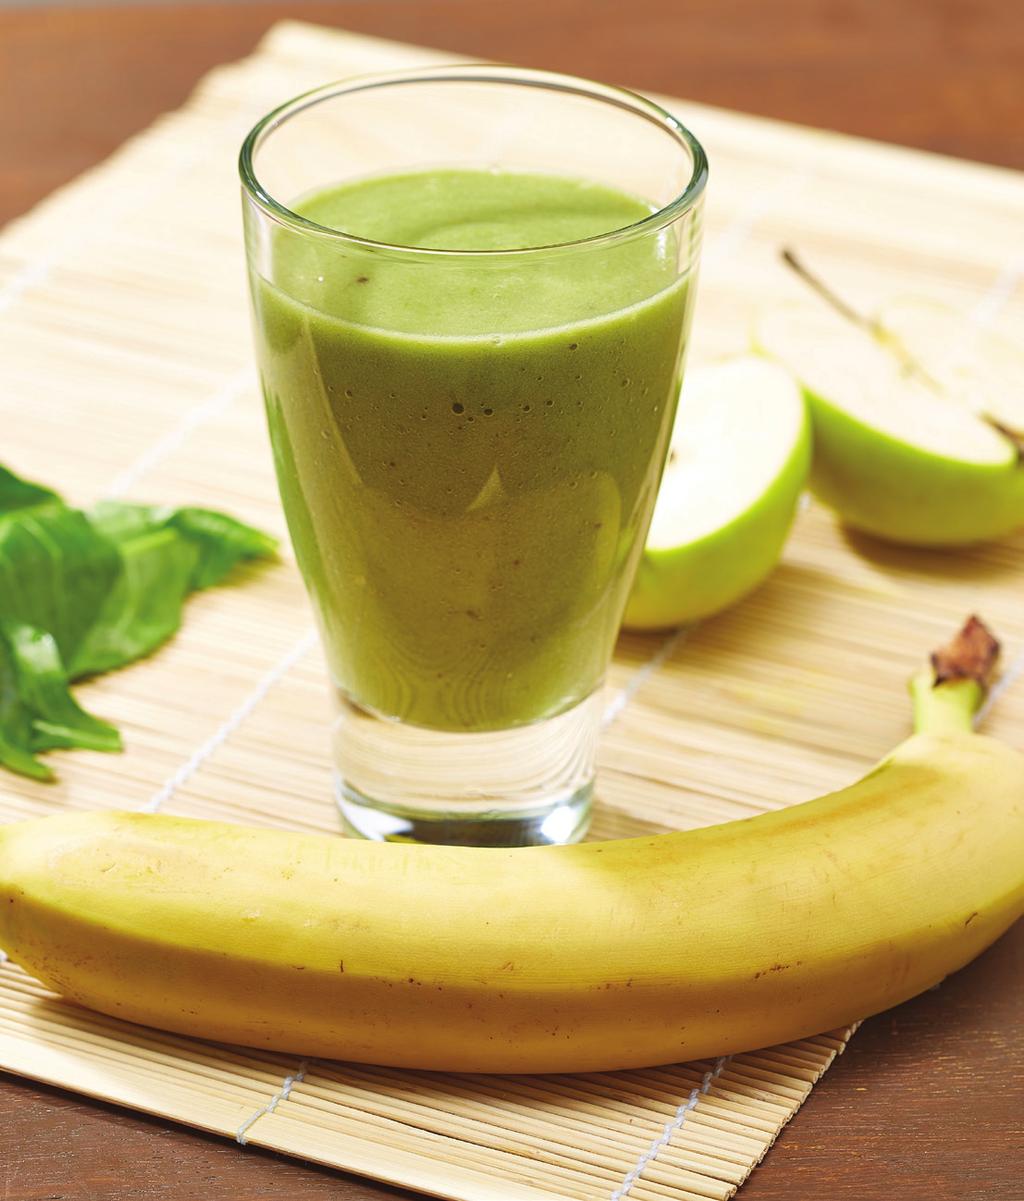 14 Oil Press OP 650W INGREDIENTS, SERVES 4: 2 bananas 8 tablespoons cold pressed hempseed oil 1 soy yoghurt, fruit 1 apple 3 fistfuls fresh spinach leaves 1 fistful grapes without seeds METHOD: